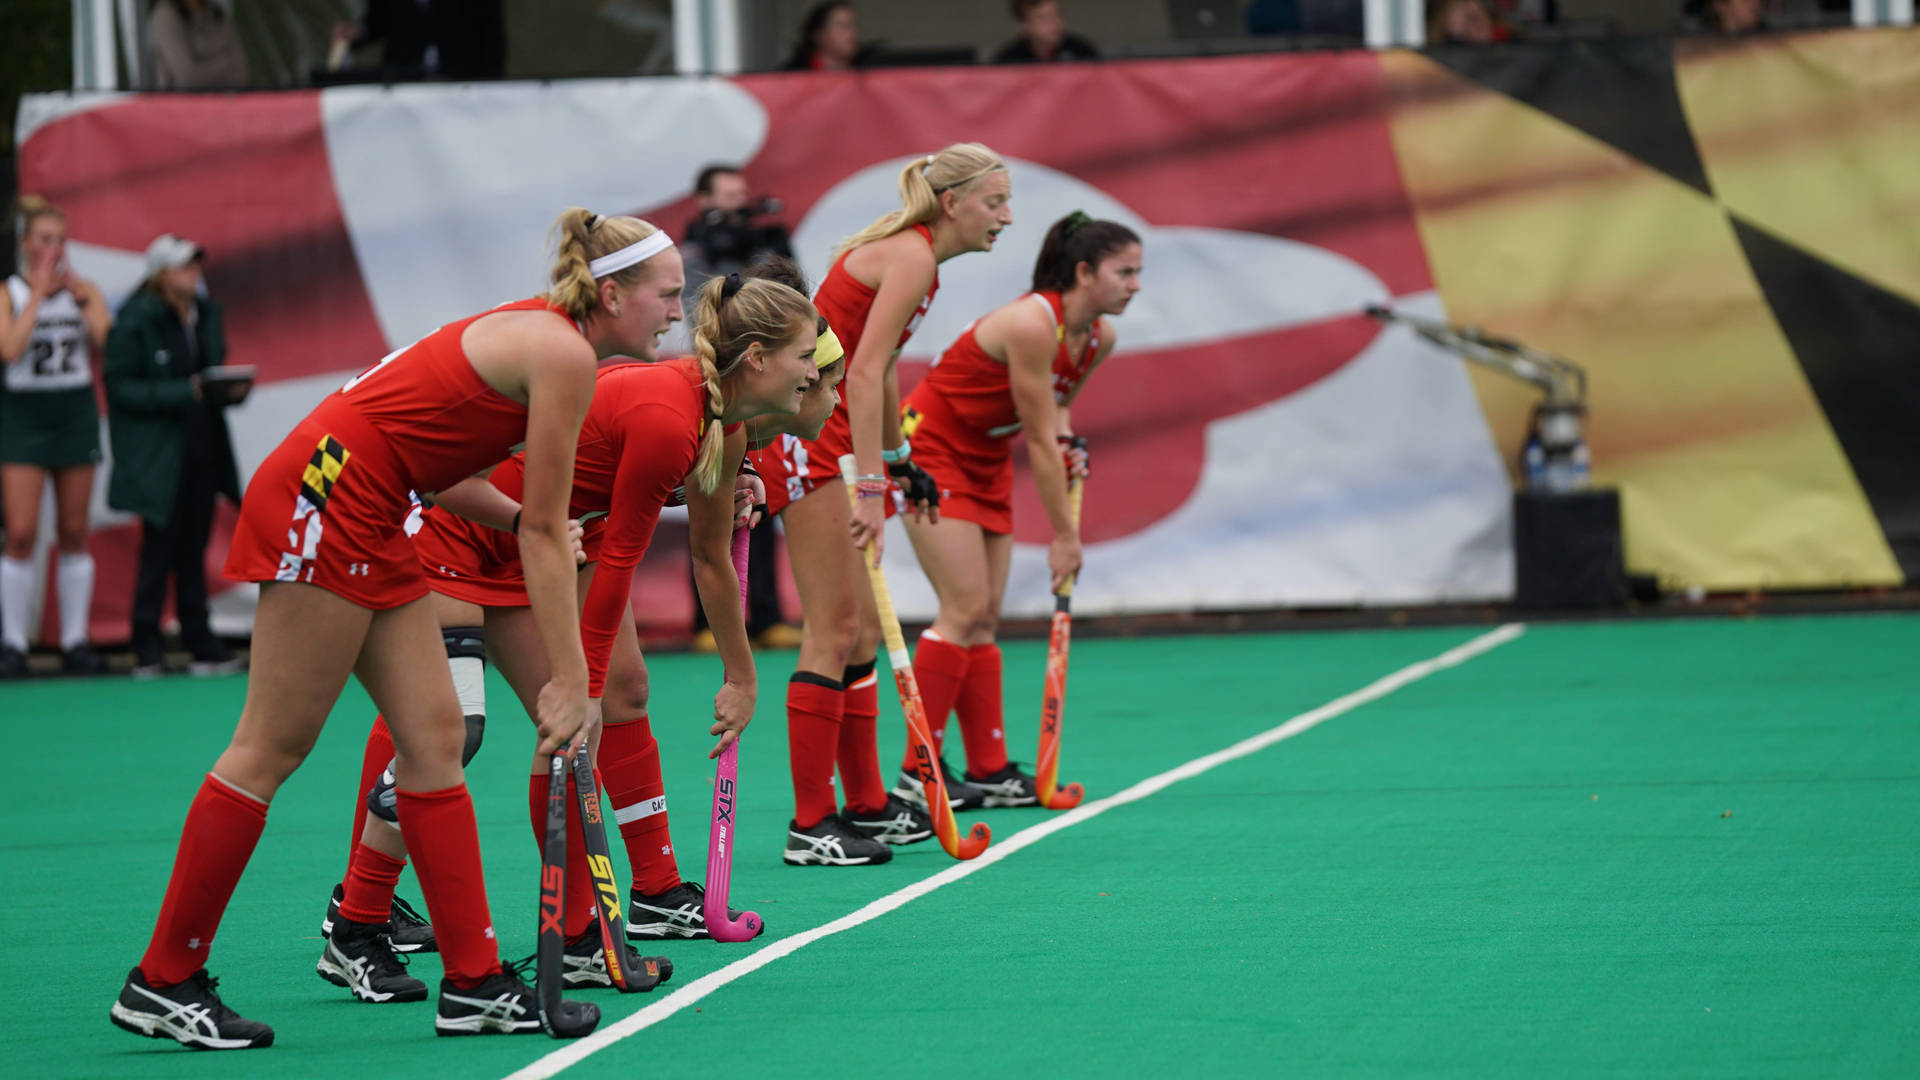 Determined Field Hockey Players Gearing Up For The Match Background